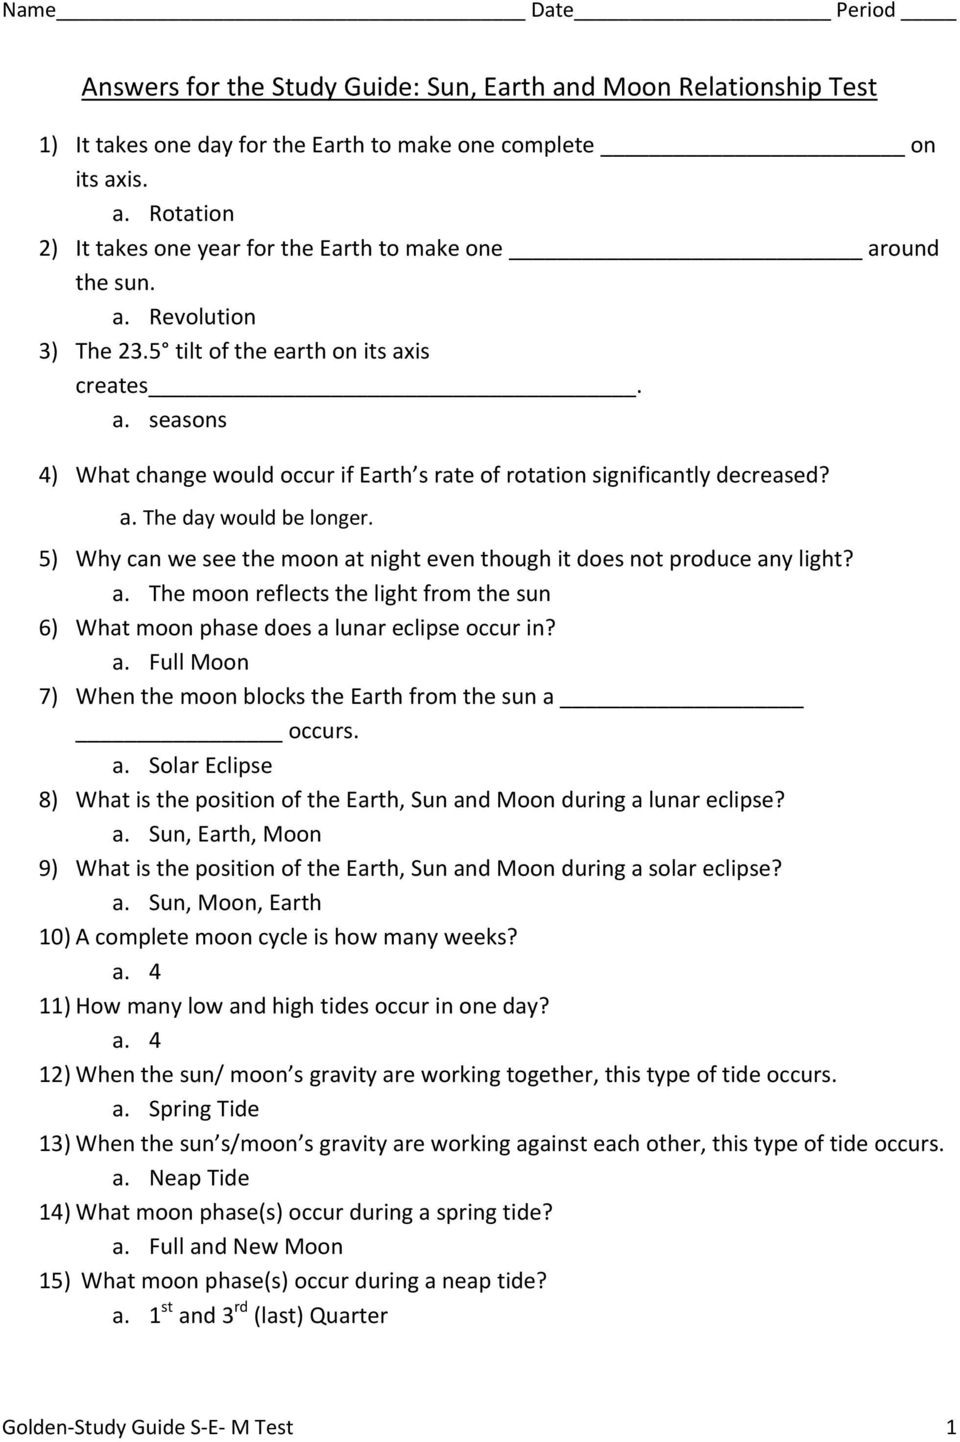 Answers For The Study Guide Sun Earth And Moon Relationship Test  Pdf